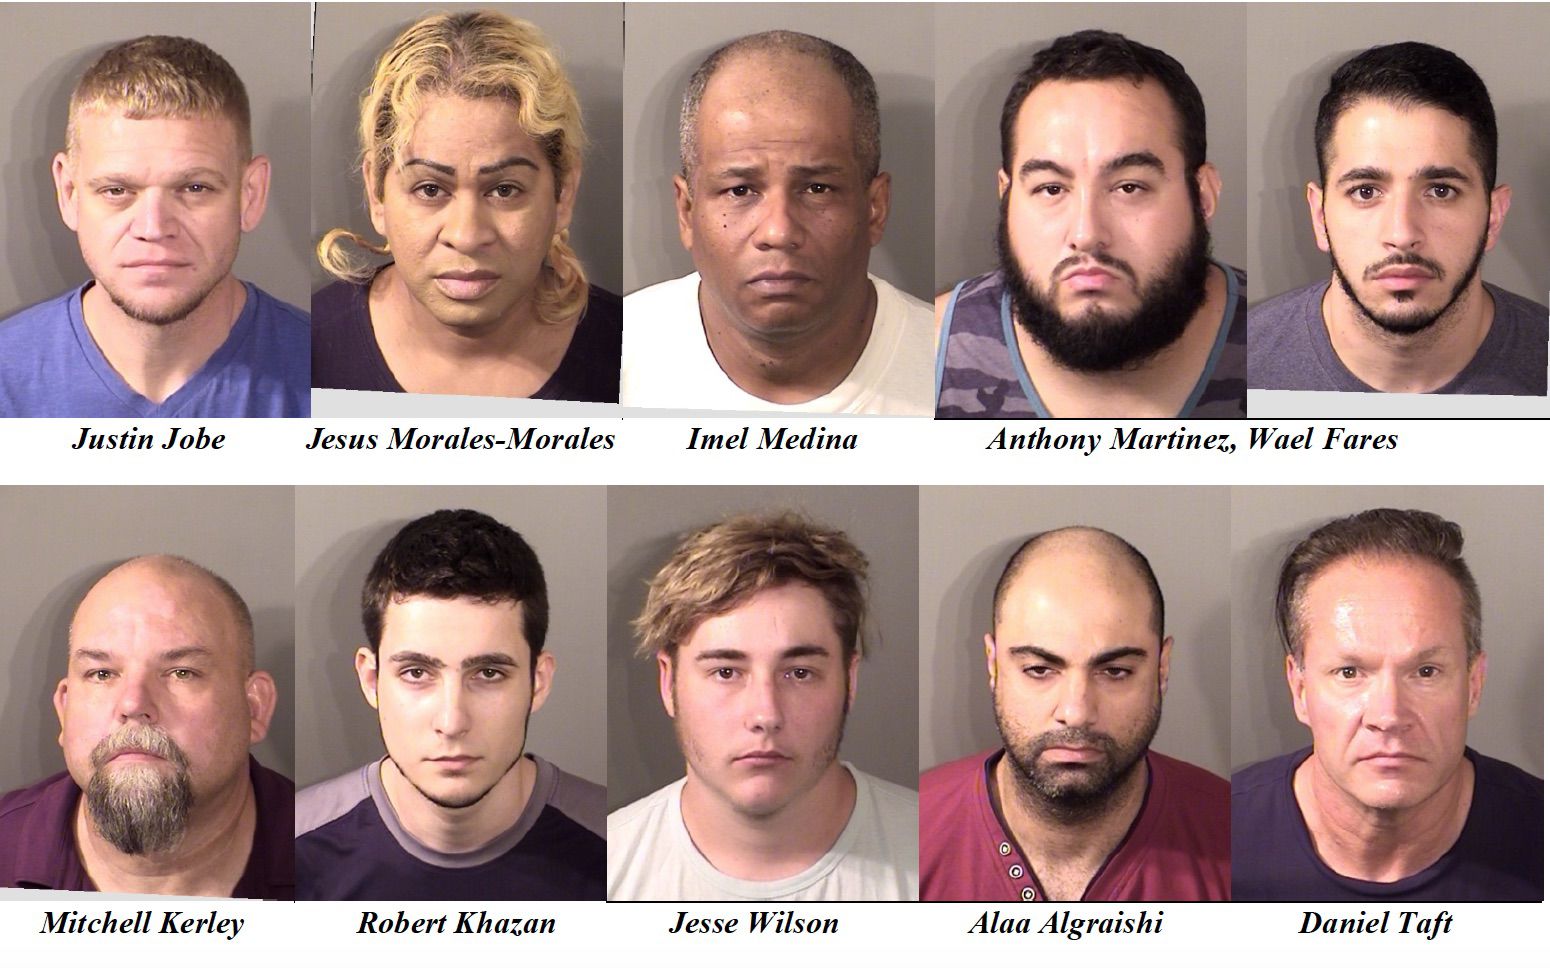 Denton County underage sex sting nets 10 suspects who wanted to have sex with minors News starlocalmedia pic